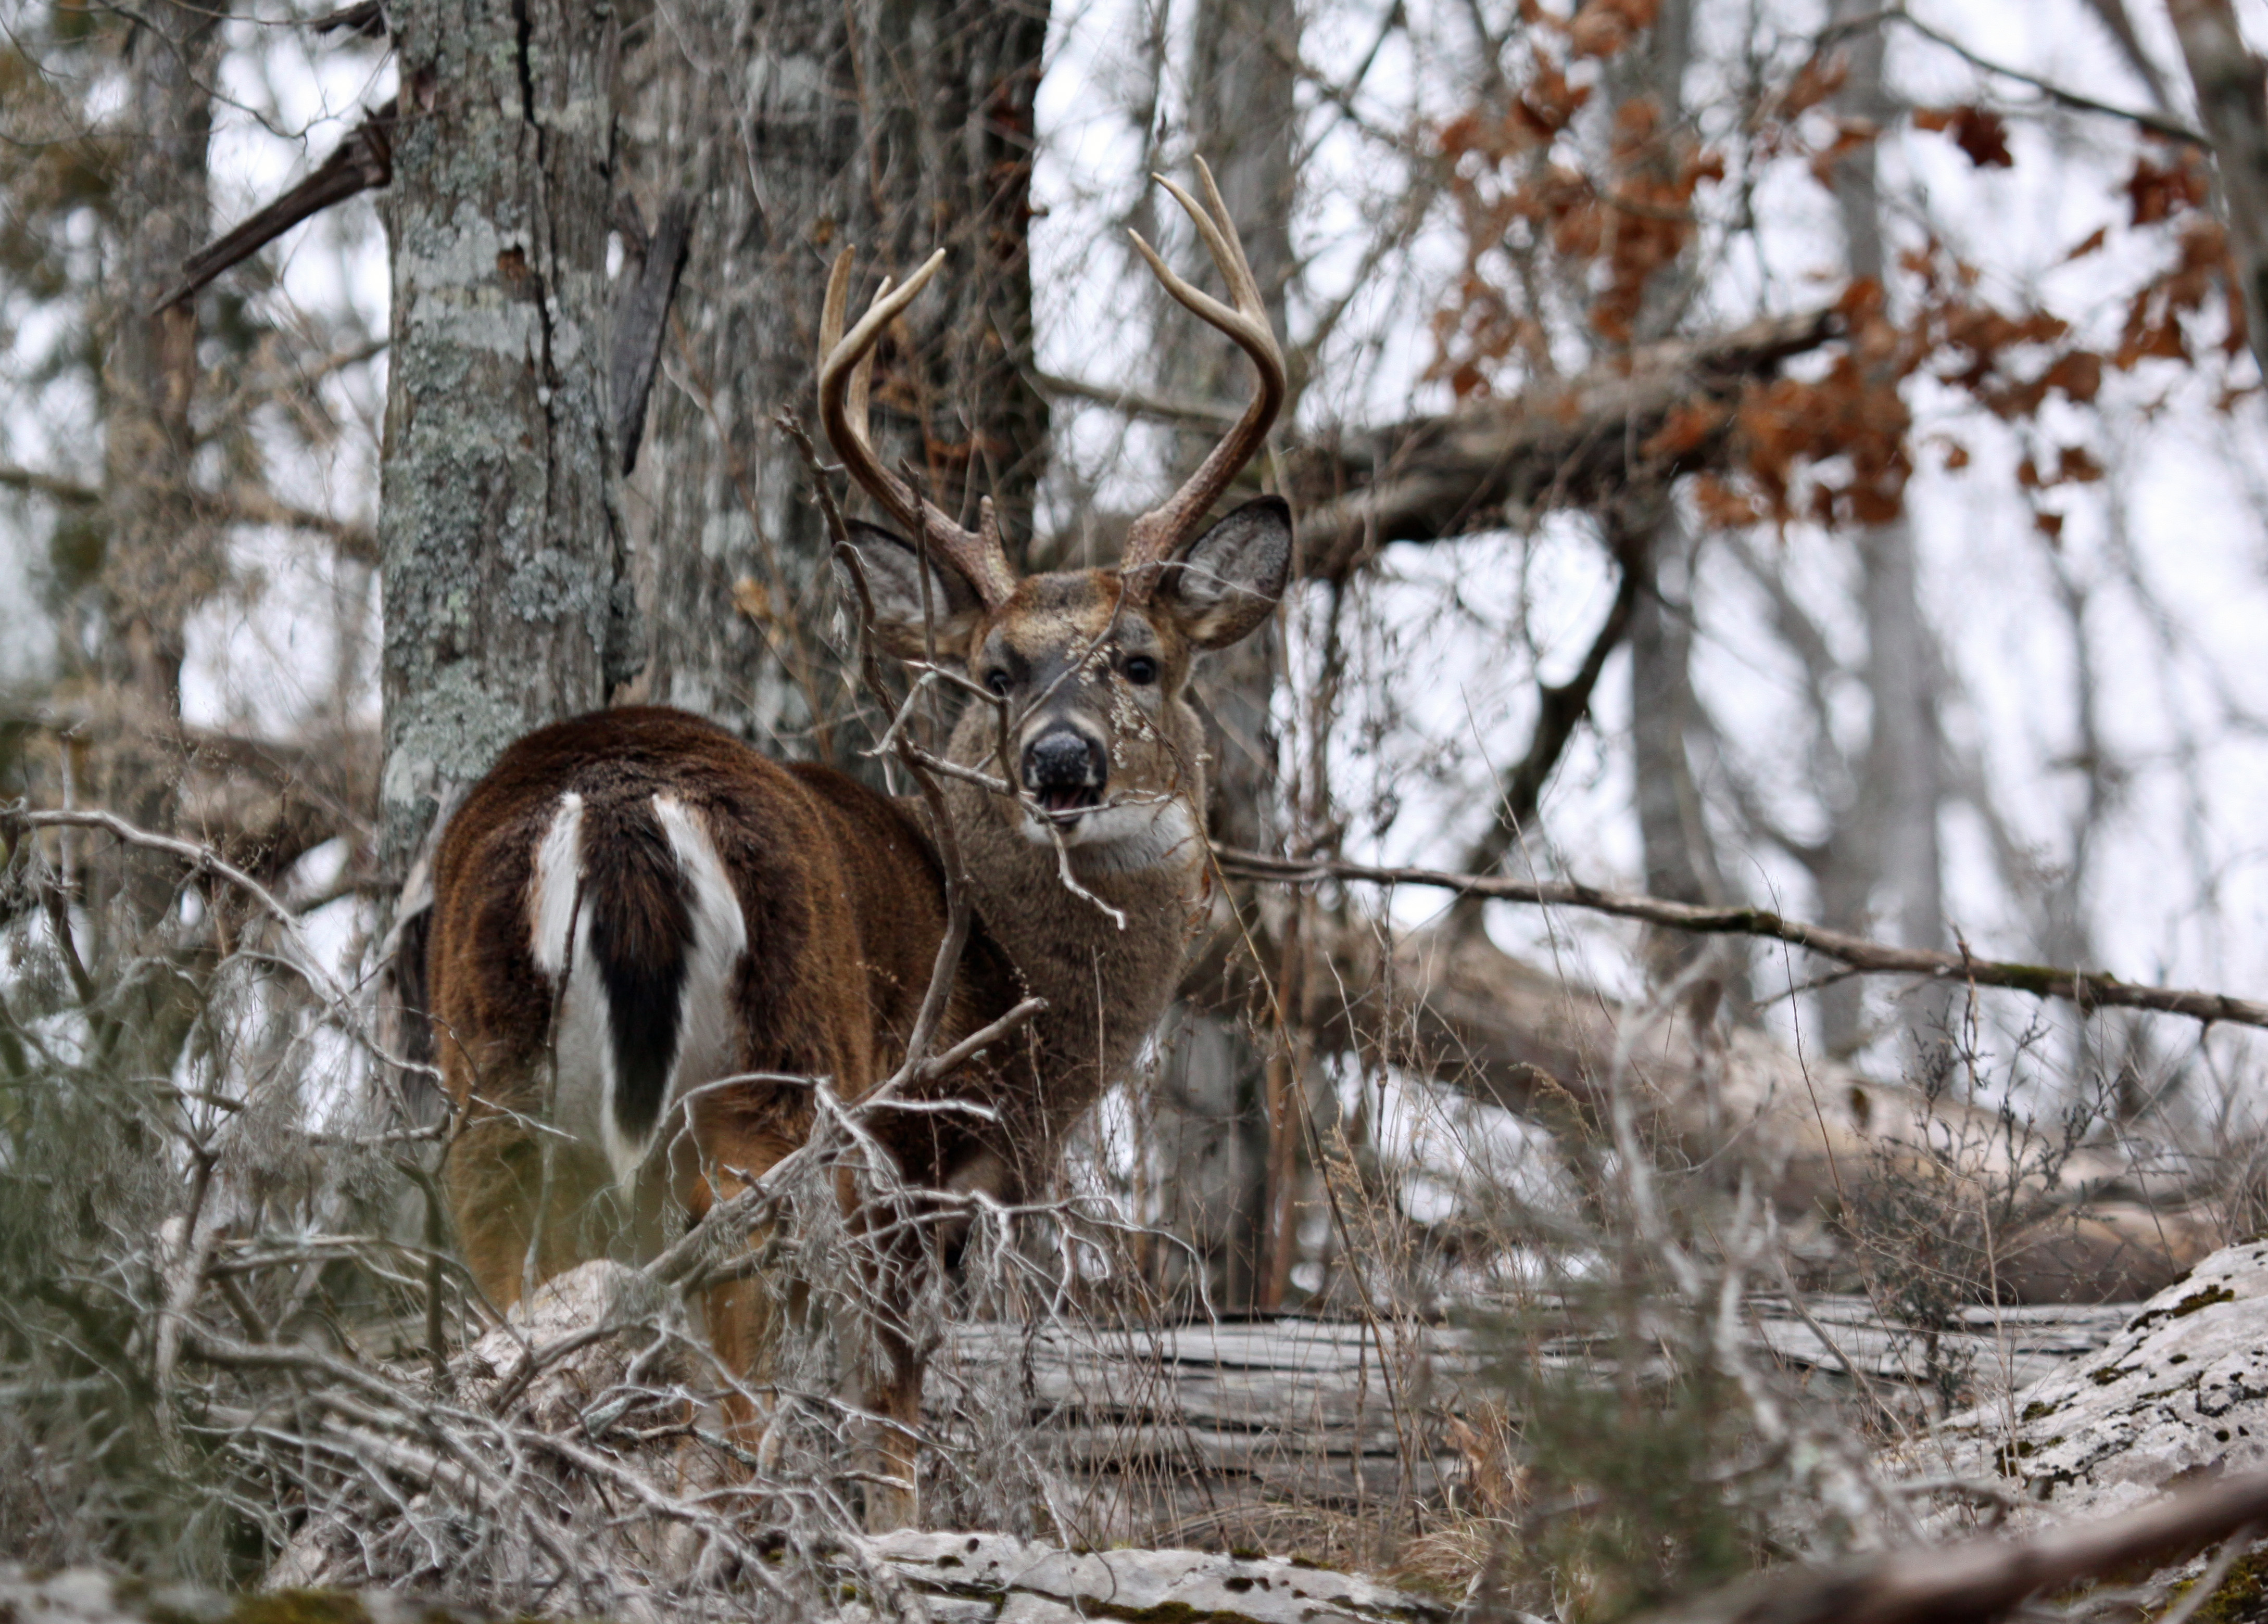 Finding deer hunting hotspots on public land will help you locate those trophy bucks.